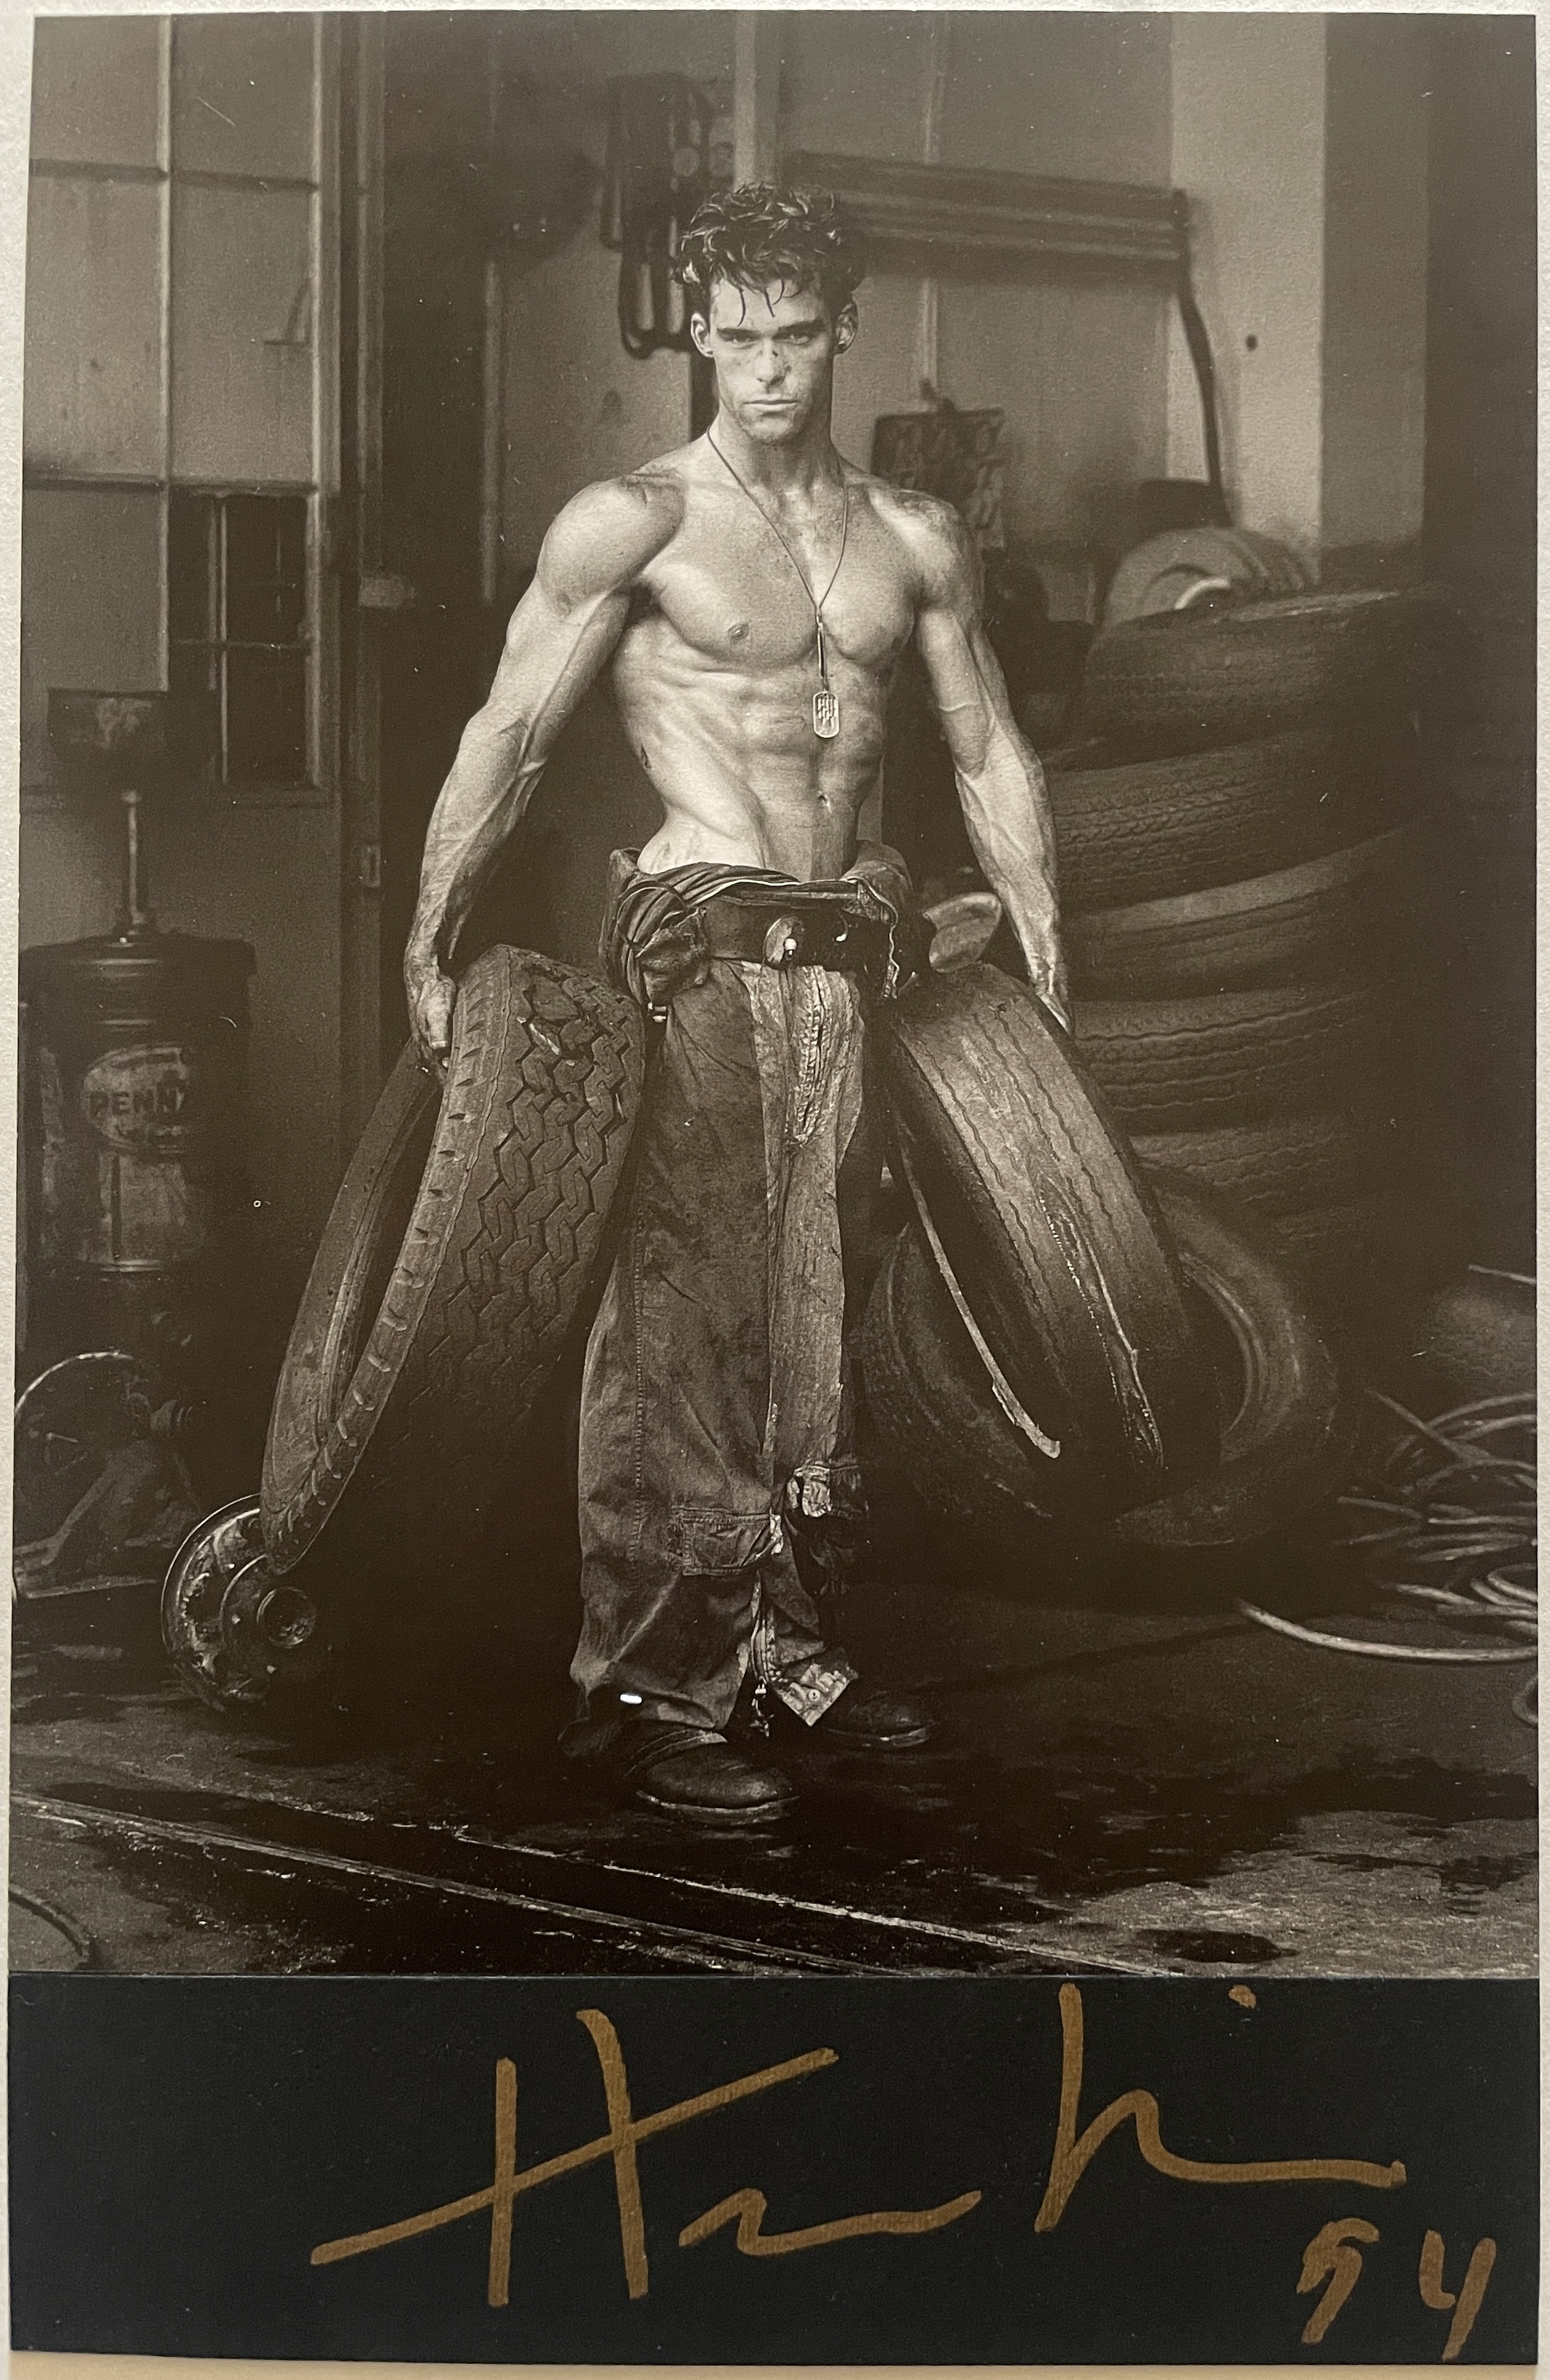 Herb Ritts "Fred With Tires, 1984" Print.